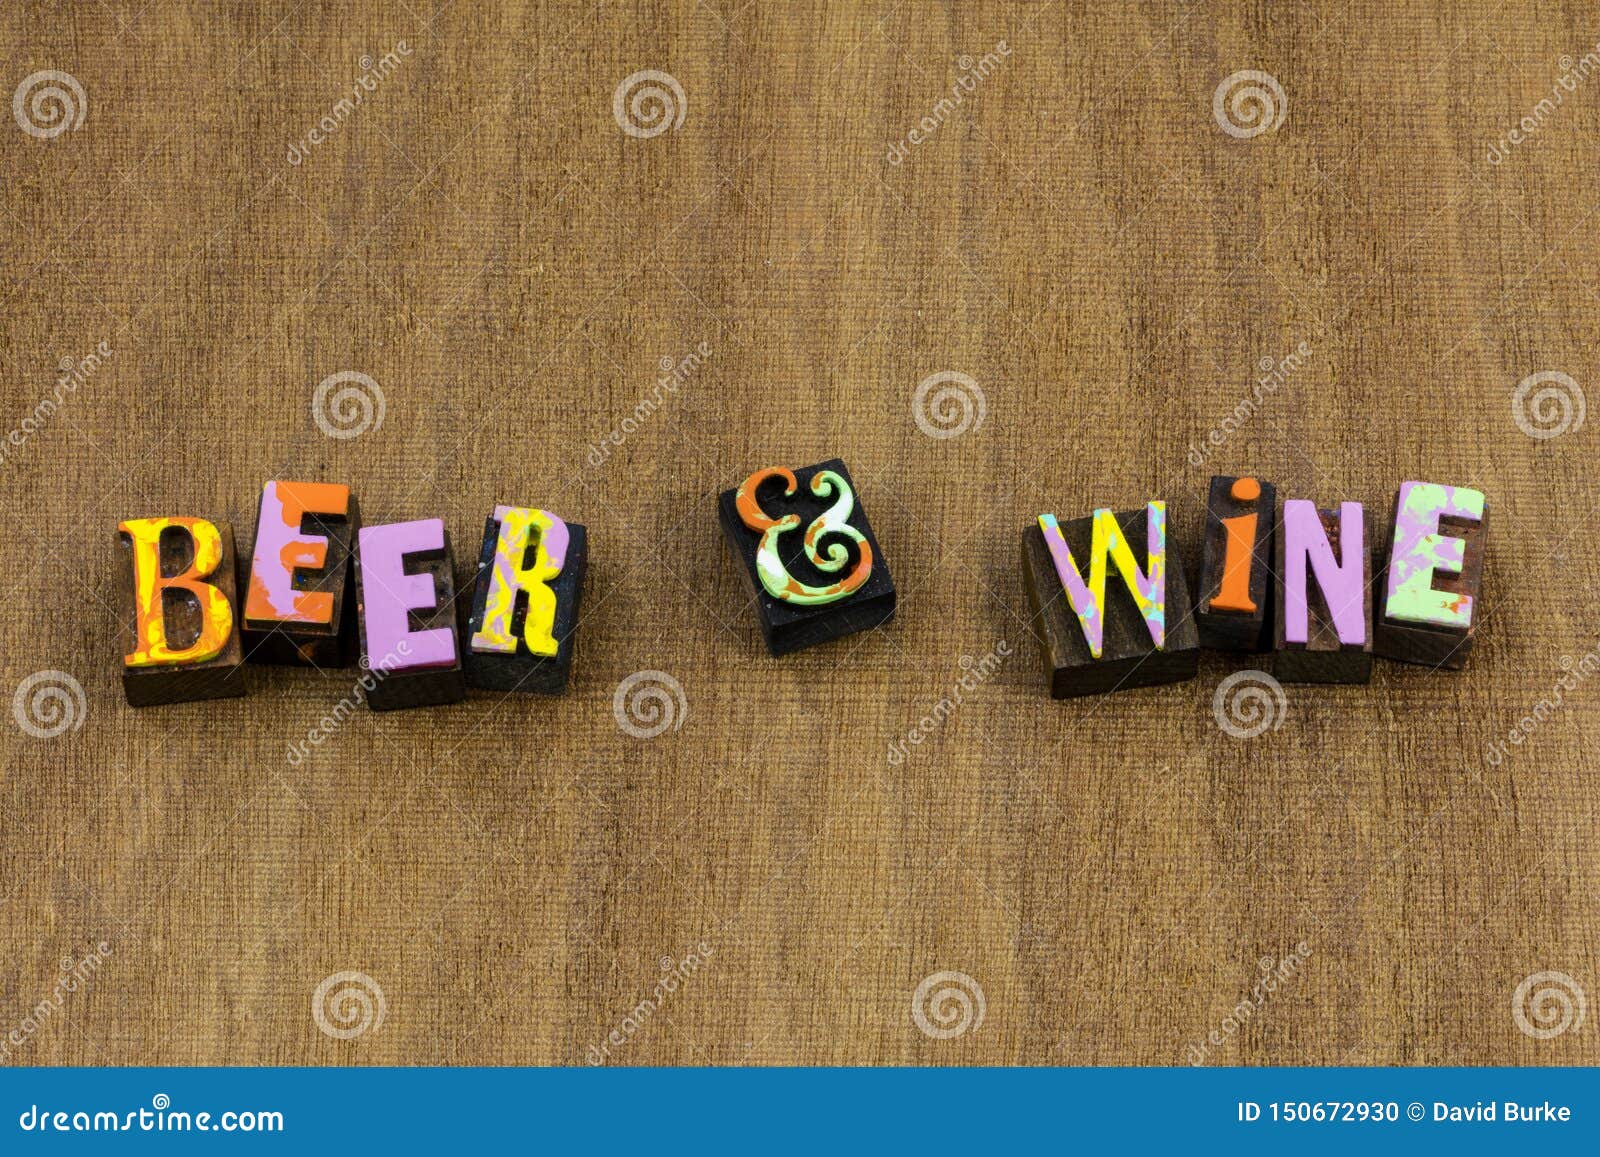 beer wine booze sign for sale liquor alcohol drink